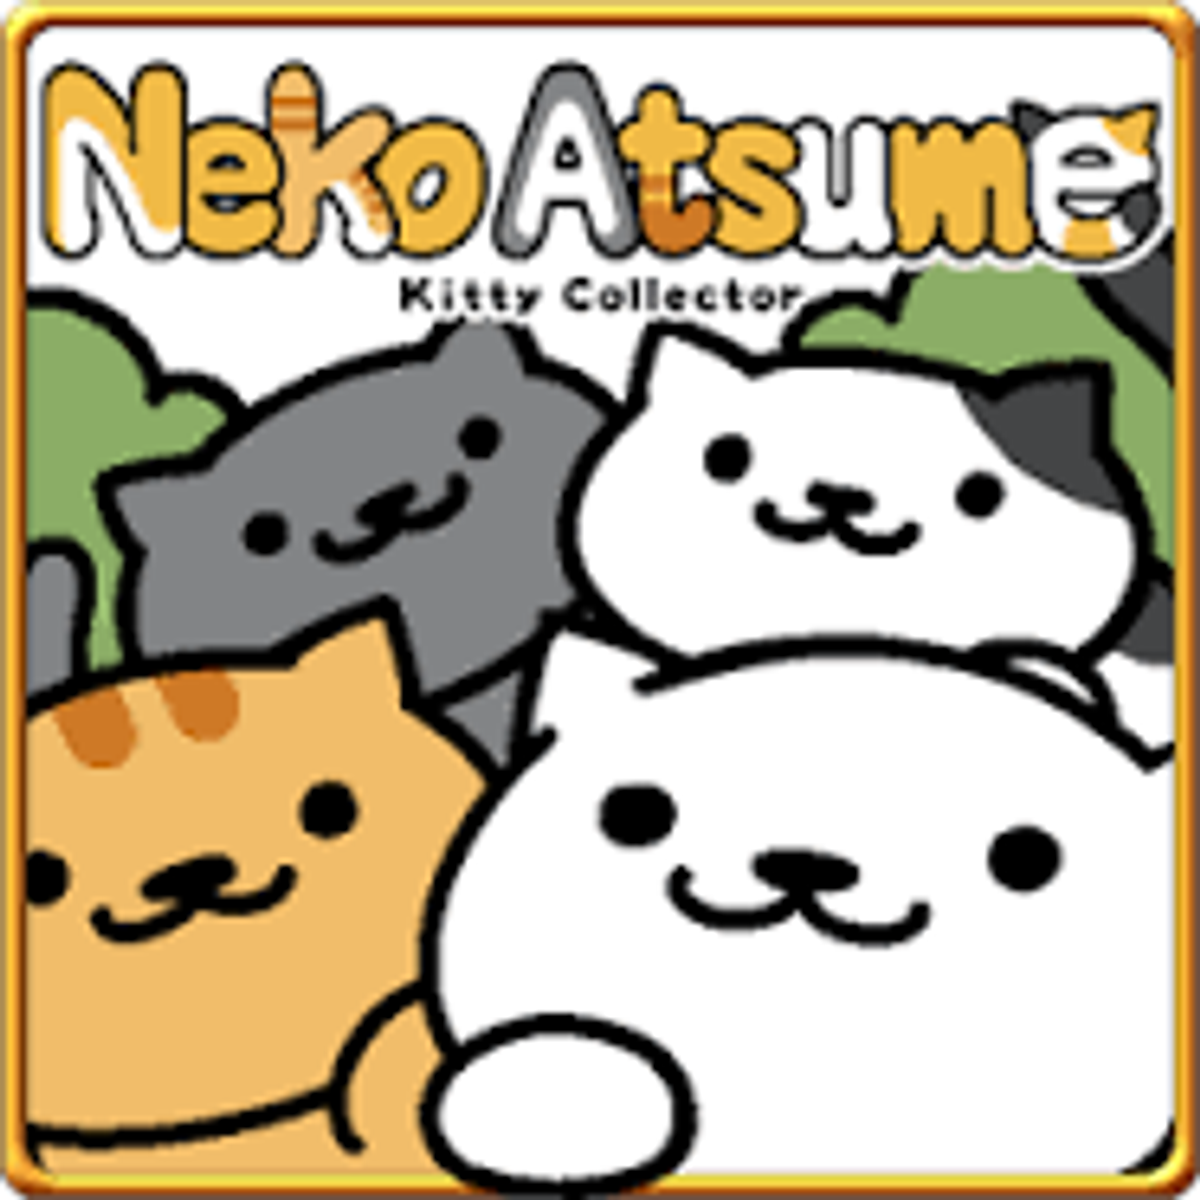 10 Signs You're Obsessed With Neko Atsume